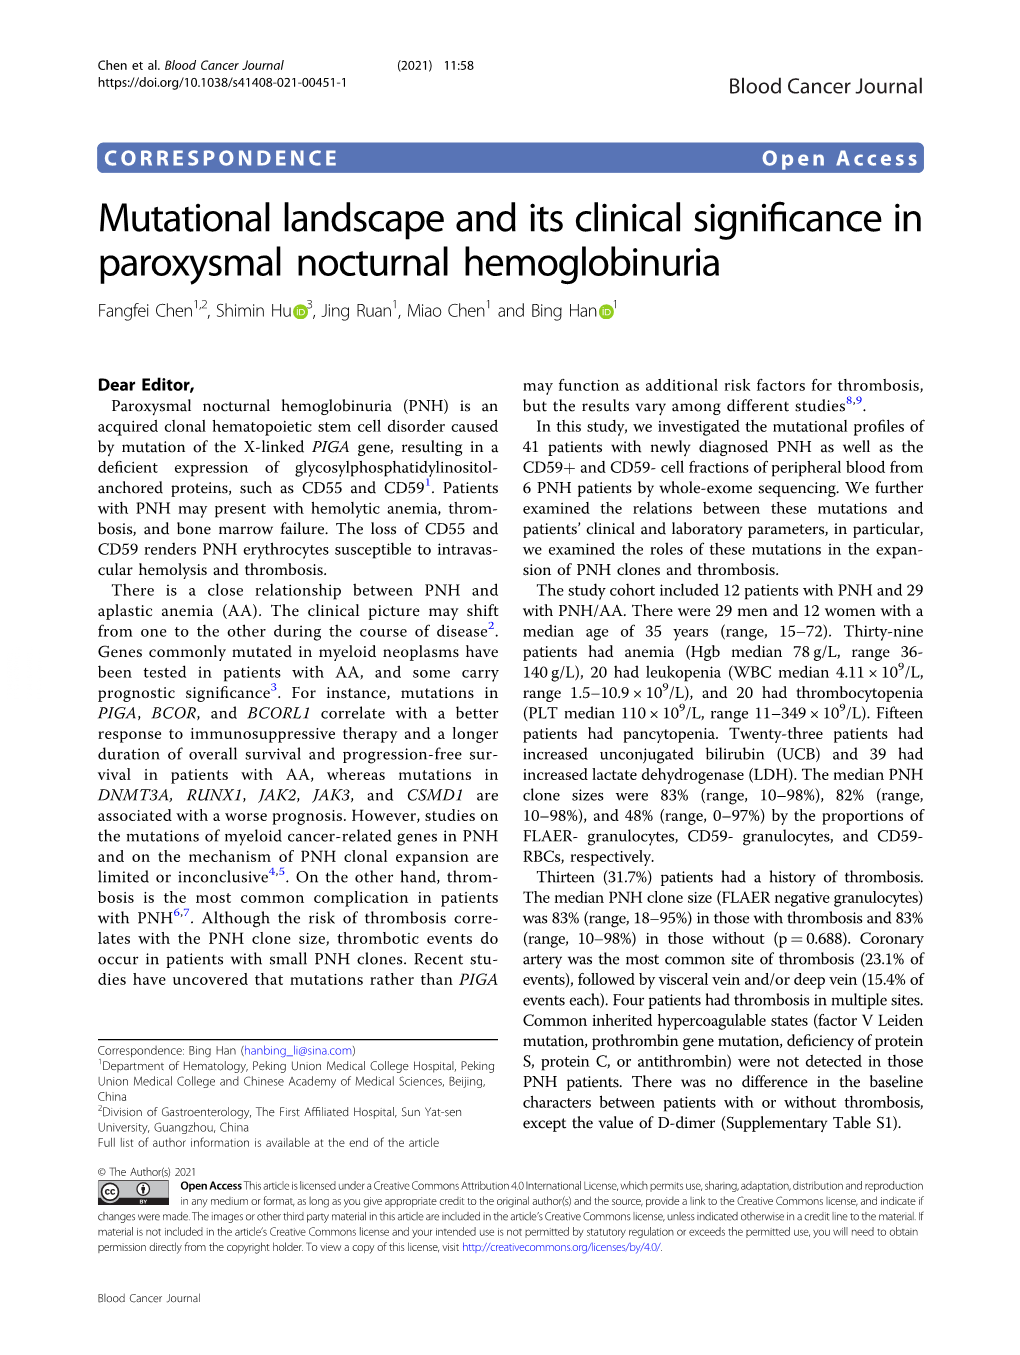 Mutational Landscape and Its Clinical Significance in Paroxysmal